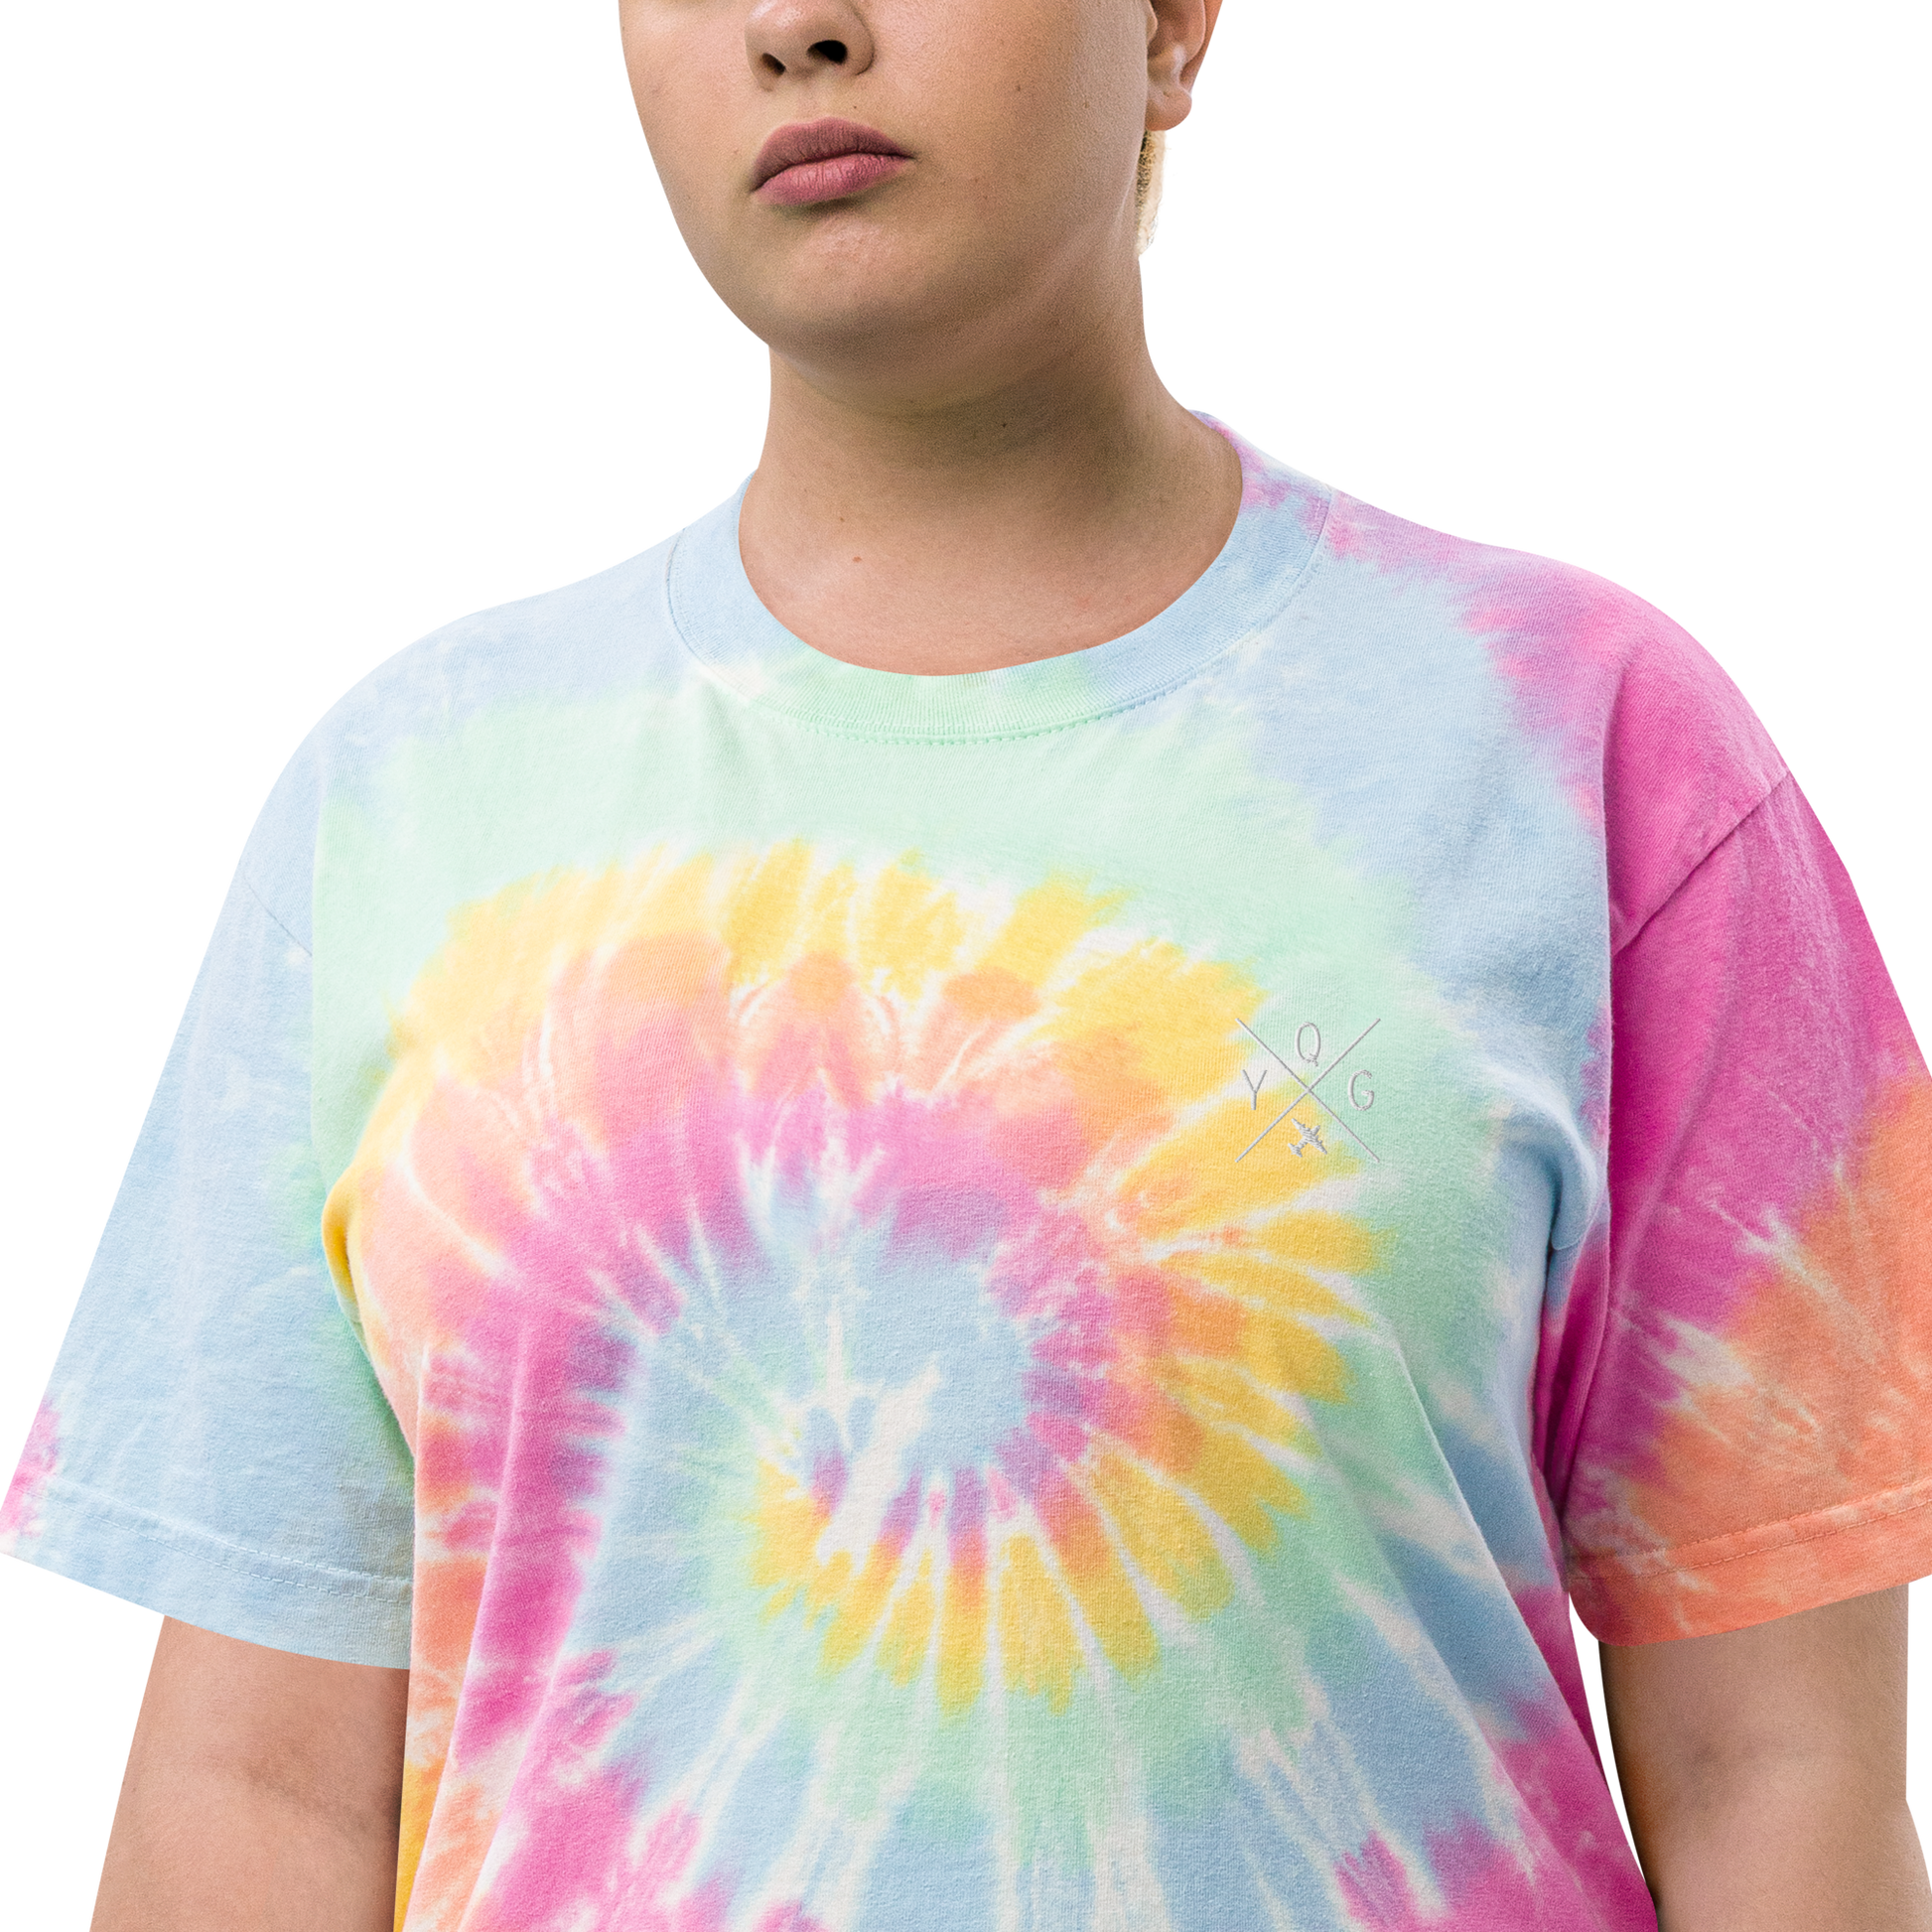 YHM Designs - YQG Windsor Oversized Tie-Dye T-Shirt - Crossed-X Design with Airport Code and Vintage Propliner - White Embroidery - Image 13